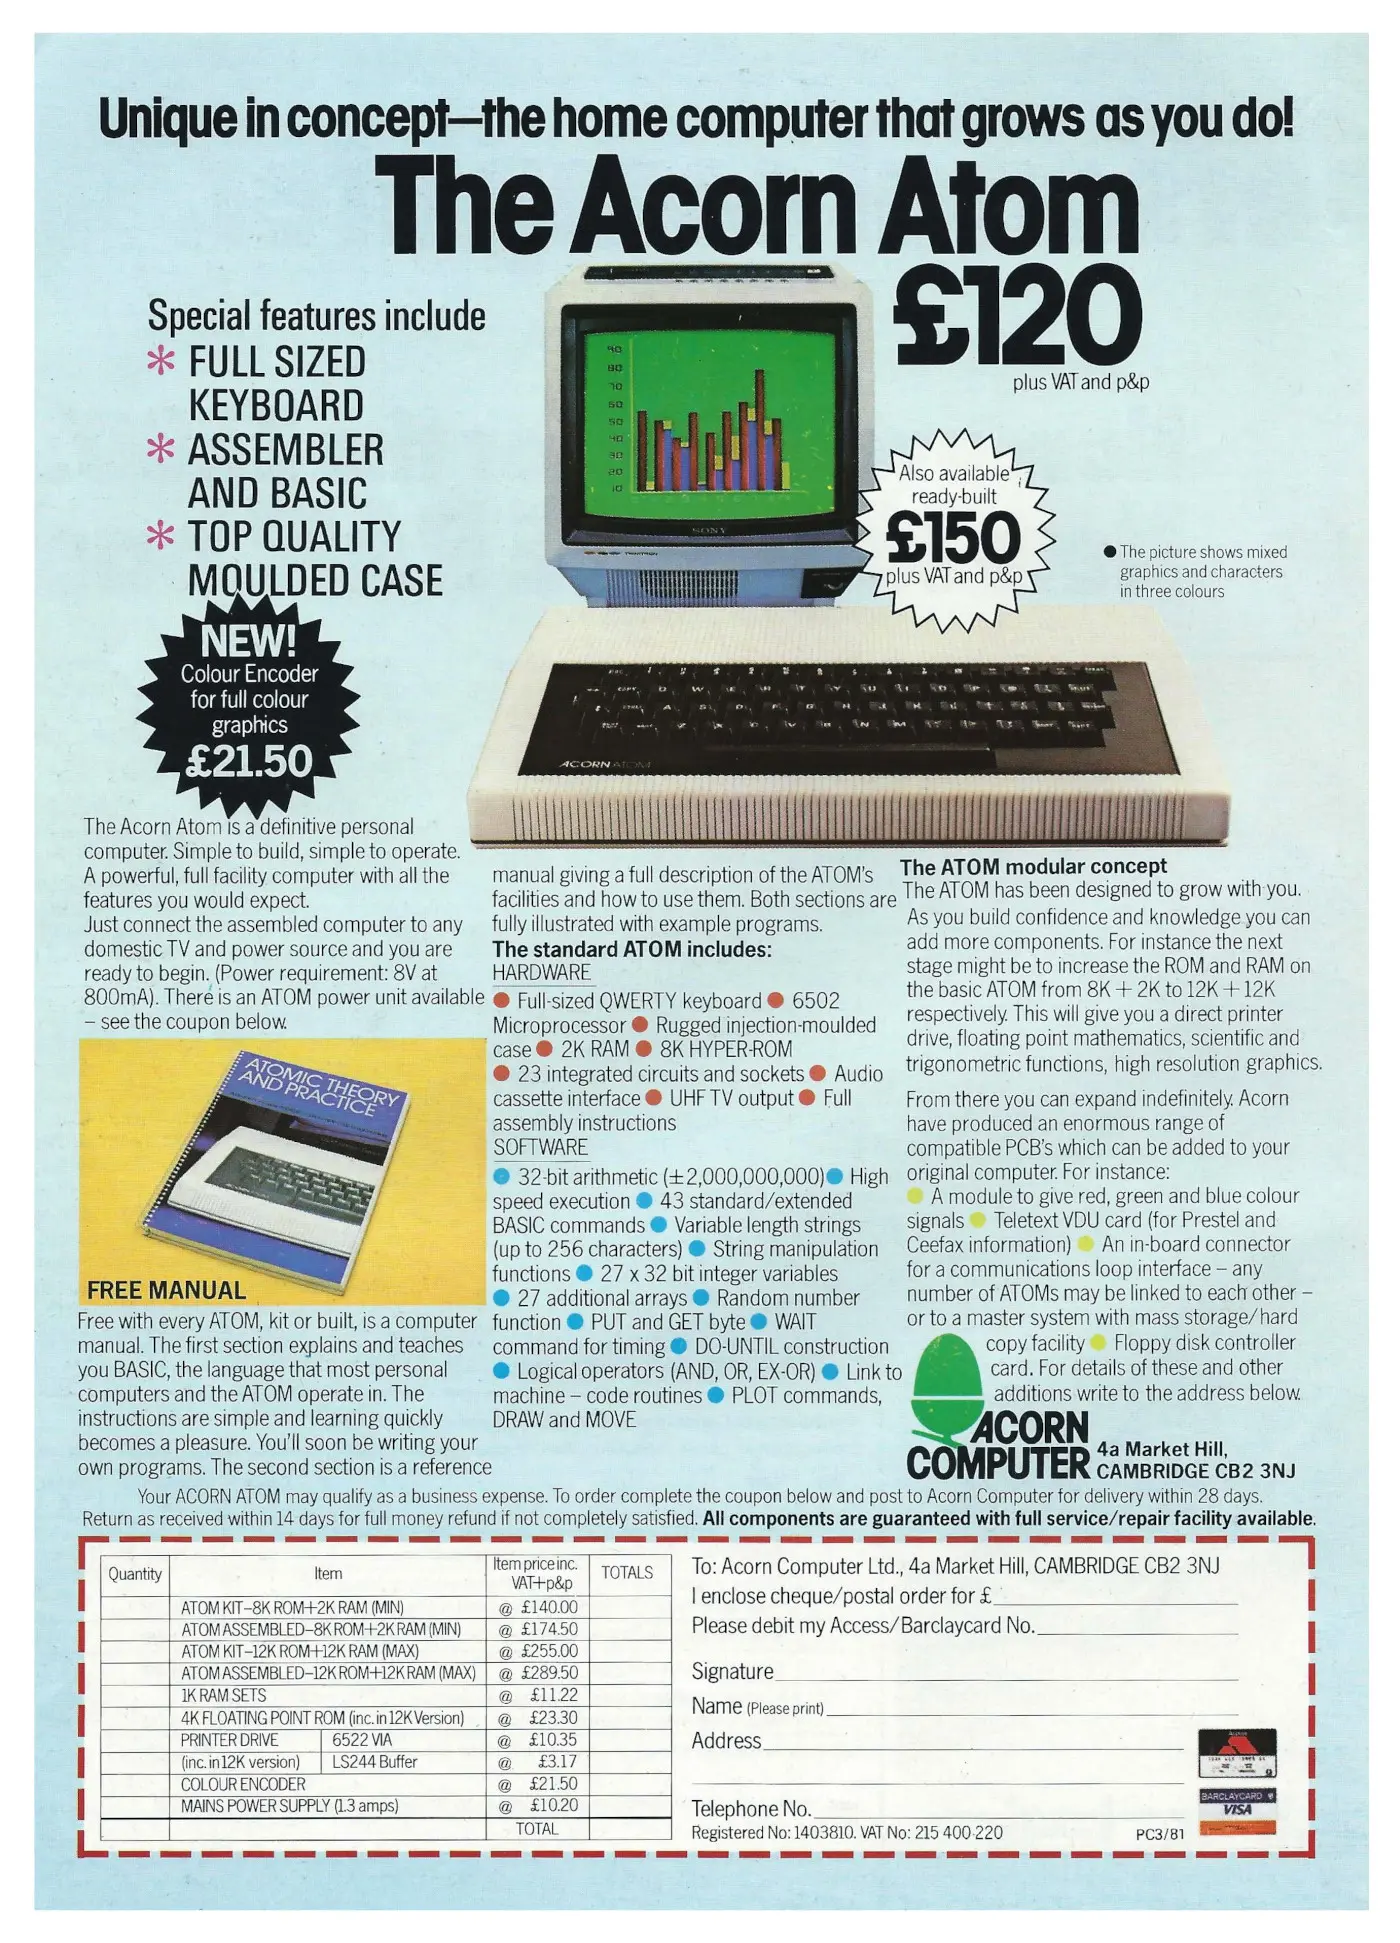 Acorn Advert: Unique in concept - the home computer that grows as you do!, from Practical Computing, March 1981